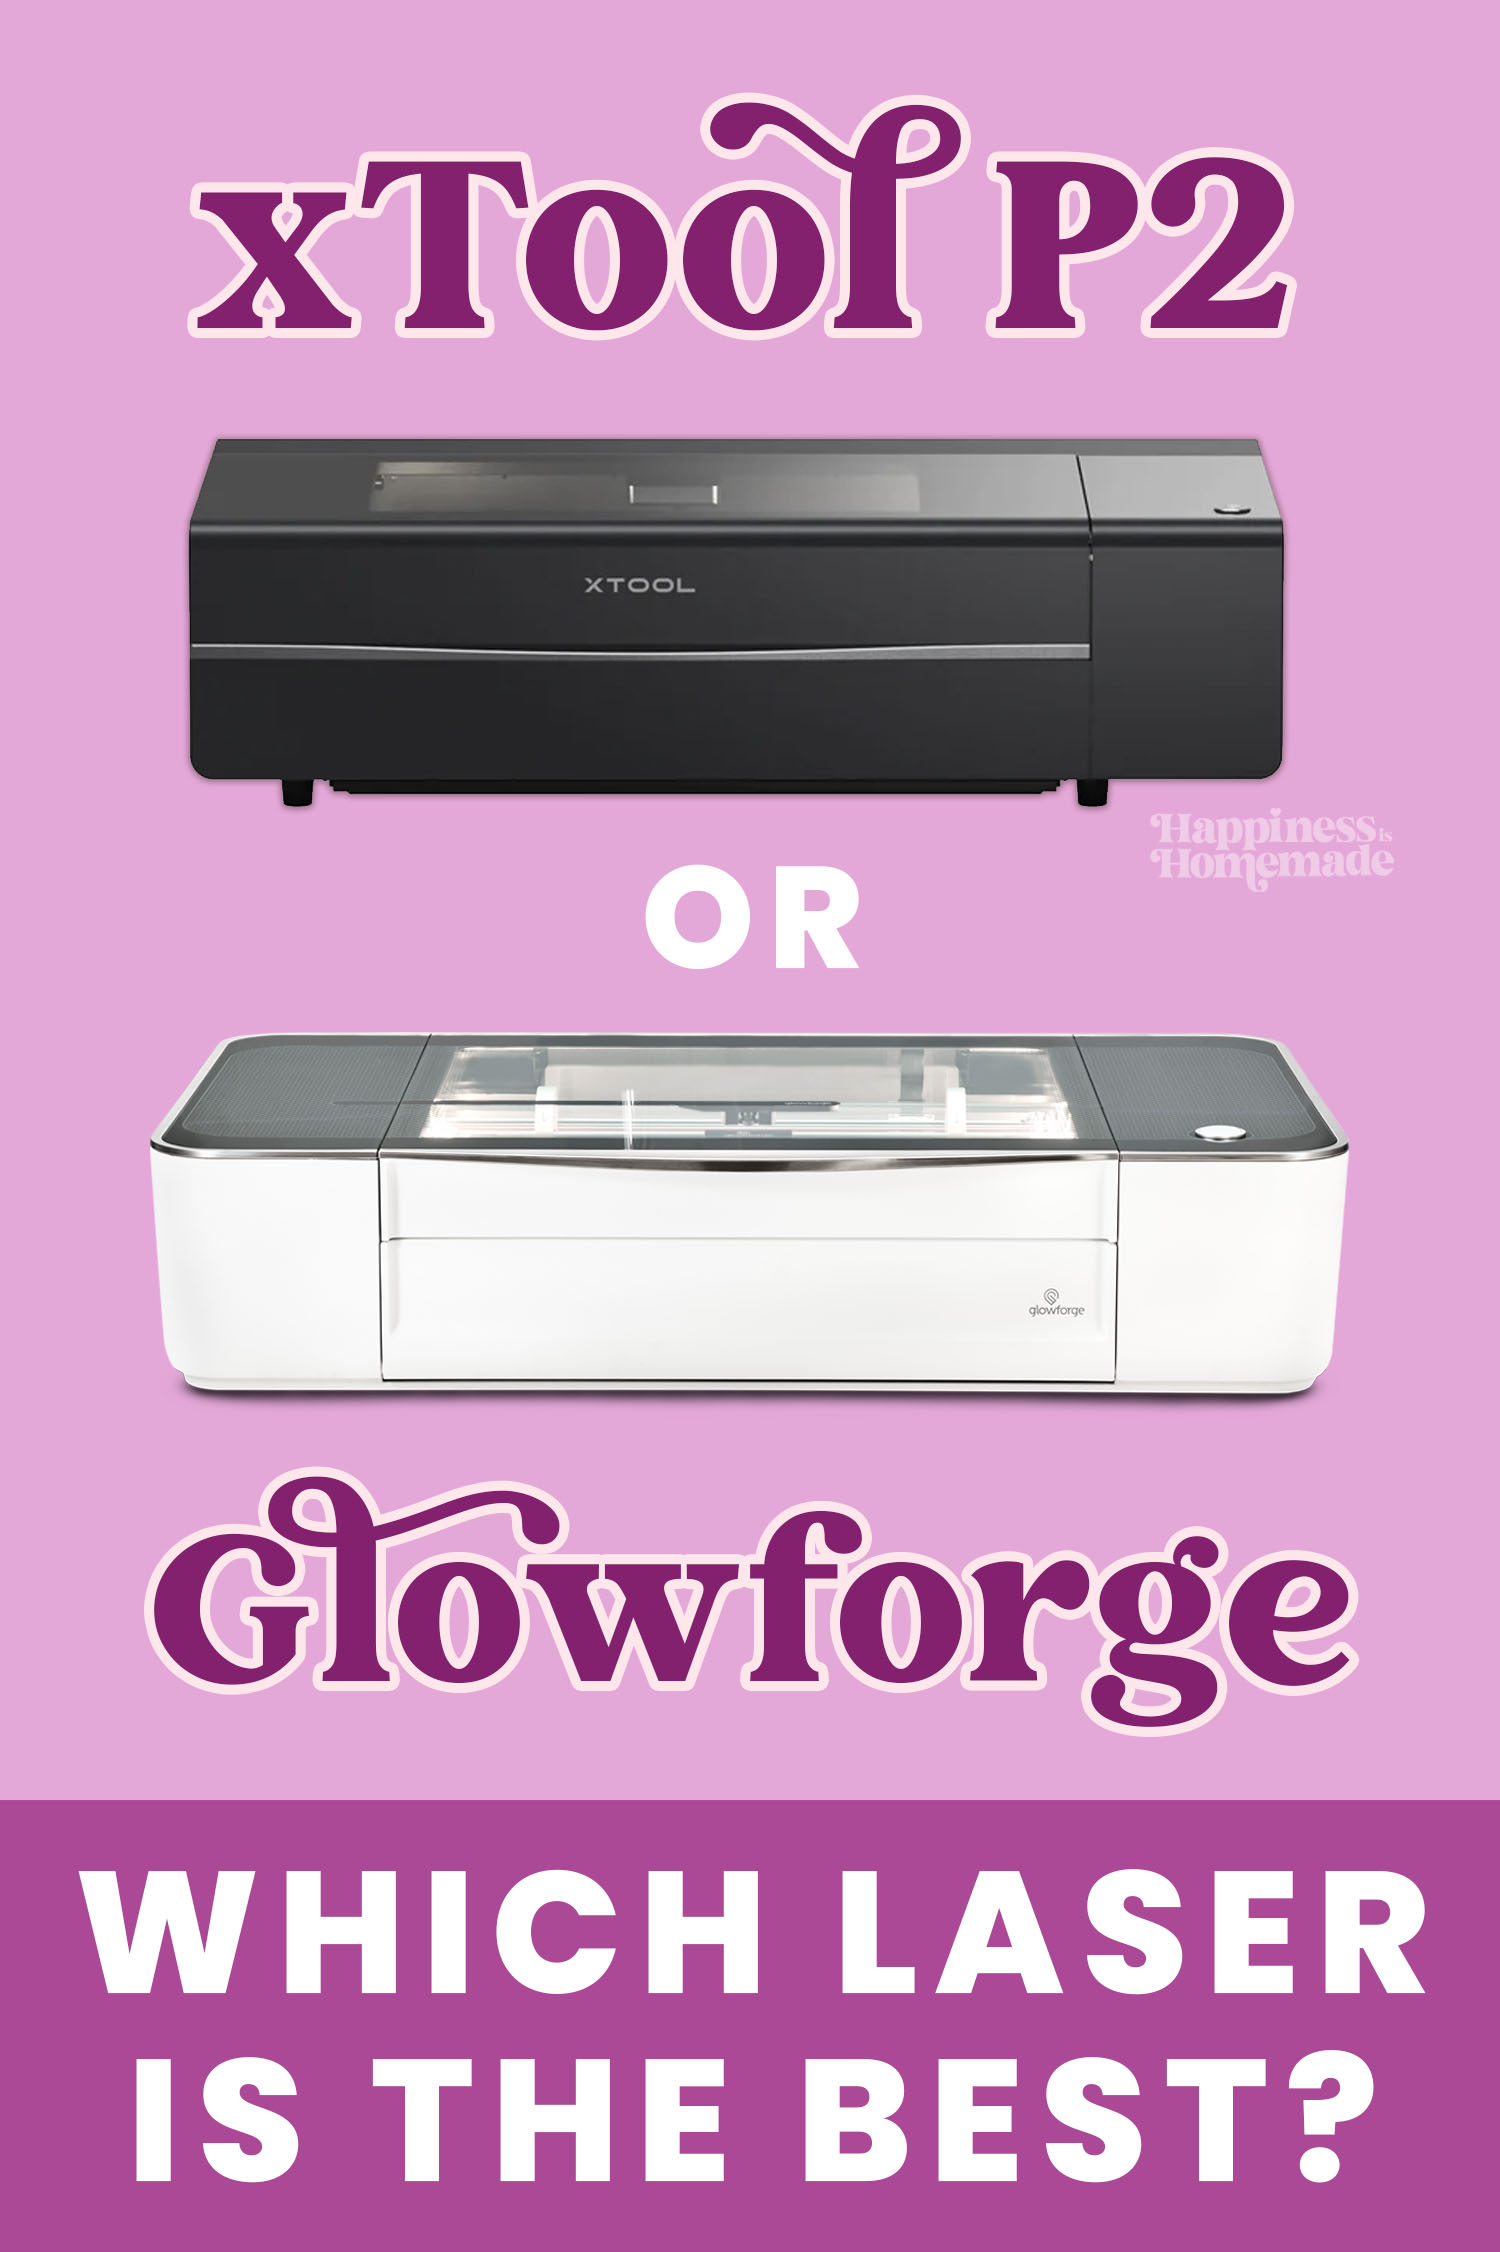 What Can you Cut and Engrave with a Glowforge? Materials & Limitations